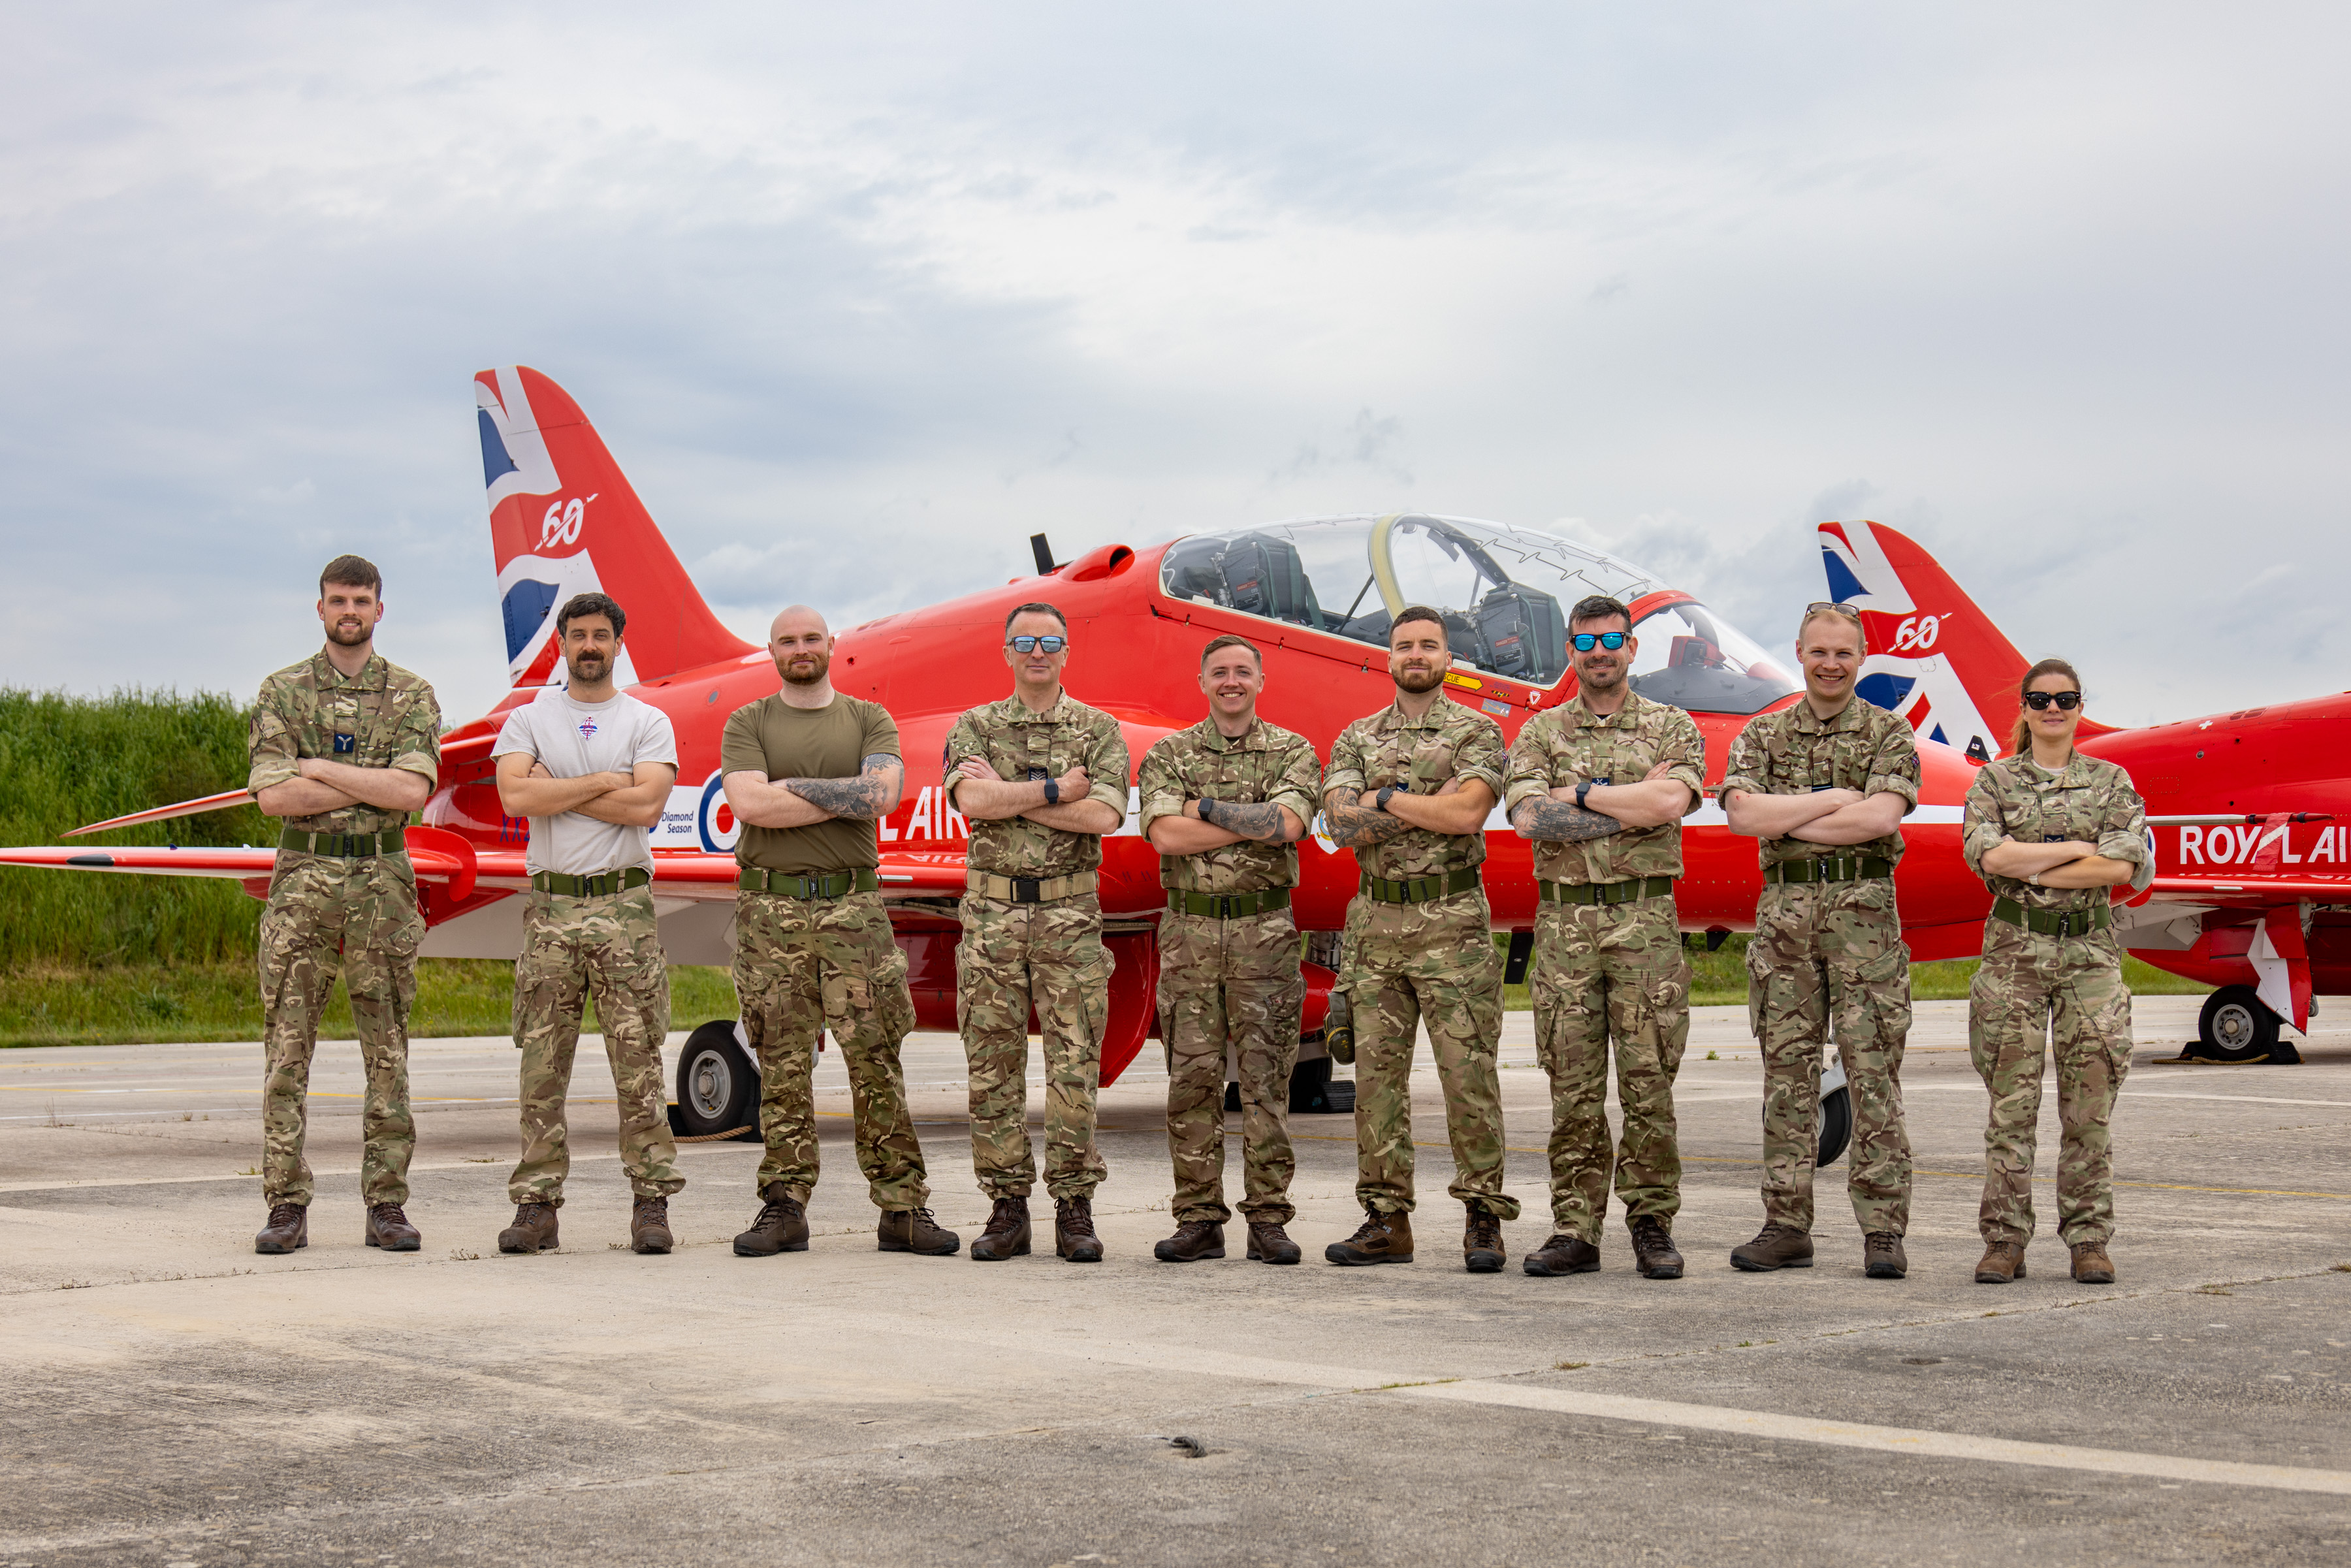 Members of the Red Arrows support team taking part in the charity challenge.